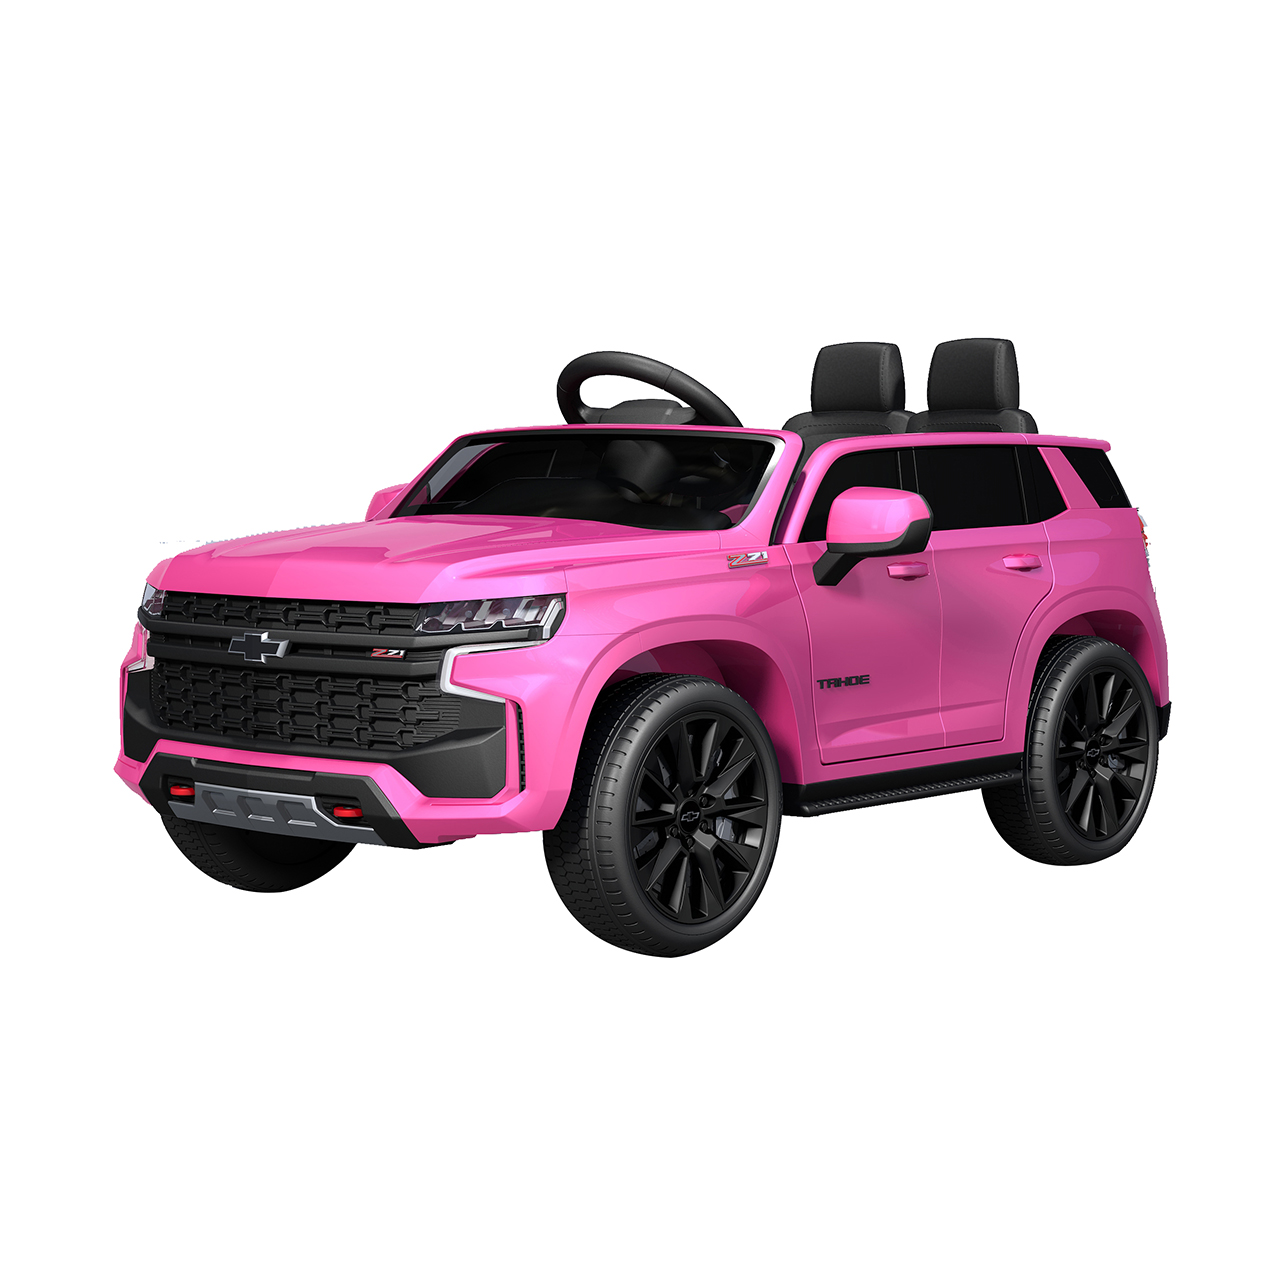 Wonderful Chevrolet Tahoe Licensed baby car ride on suv car for kids electric toy car with remote control